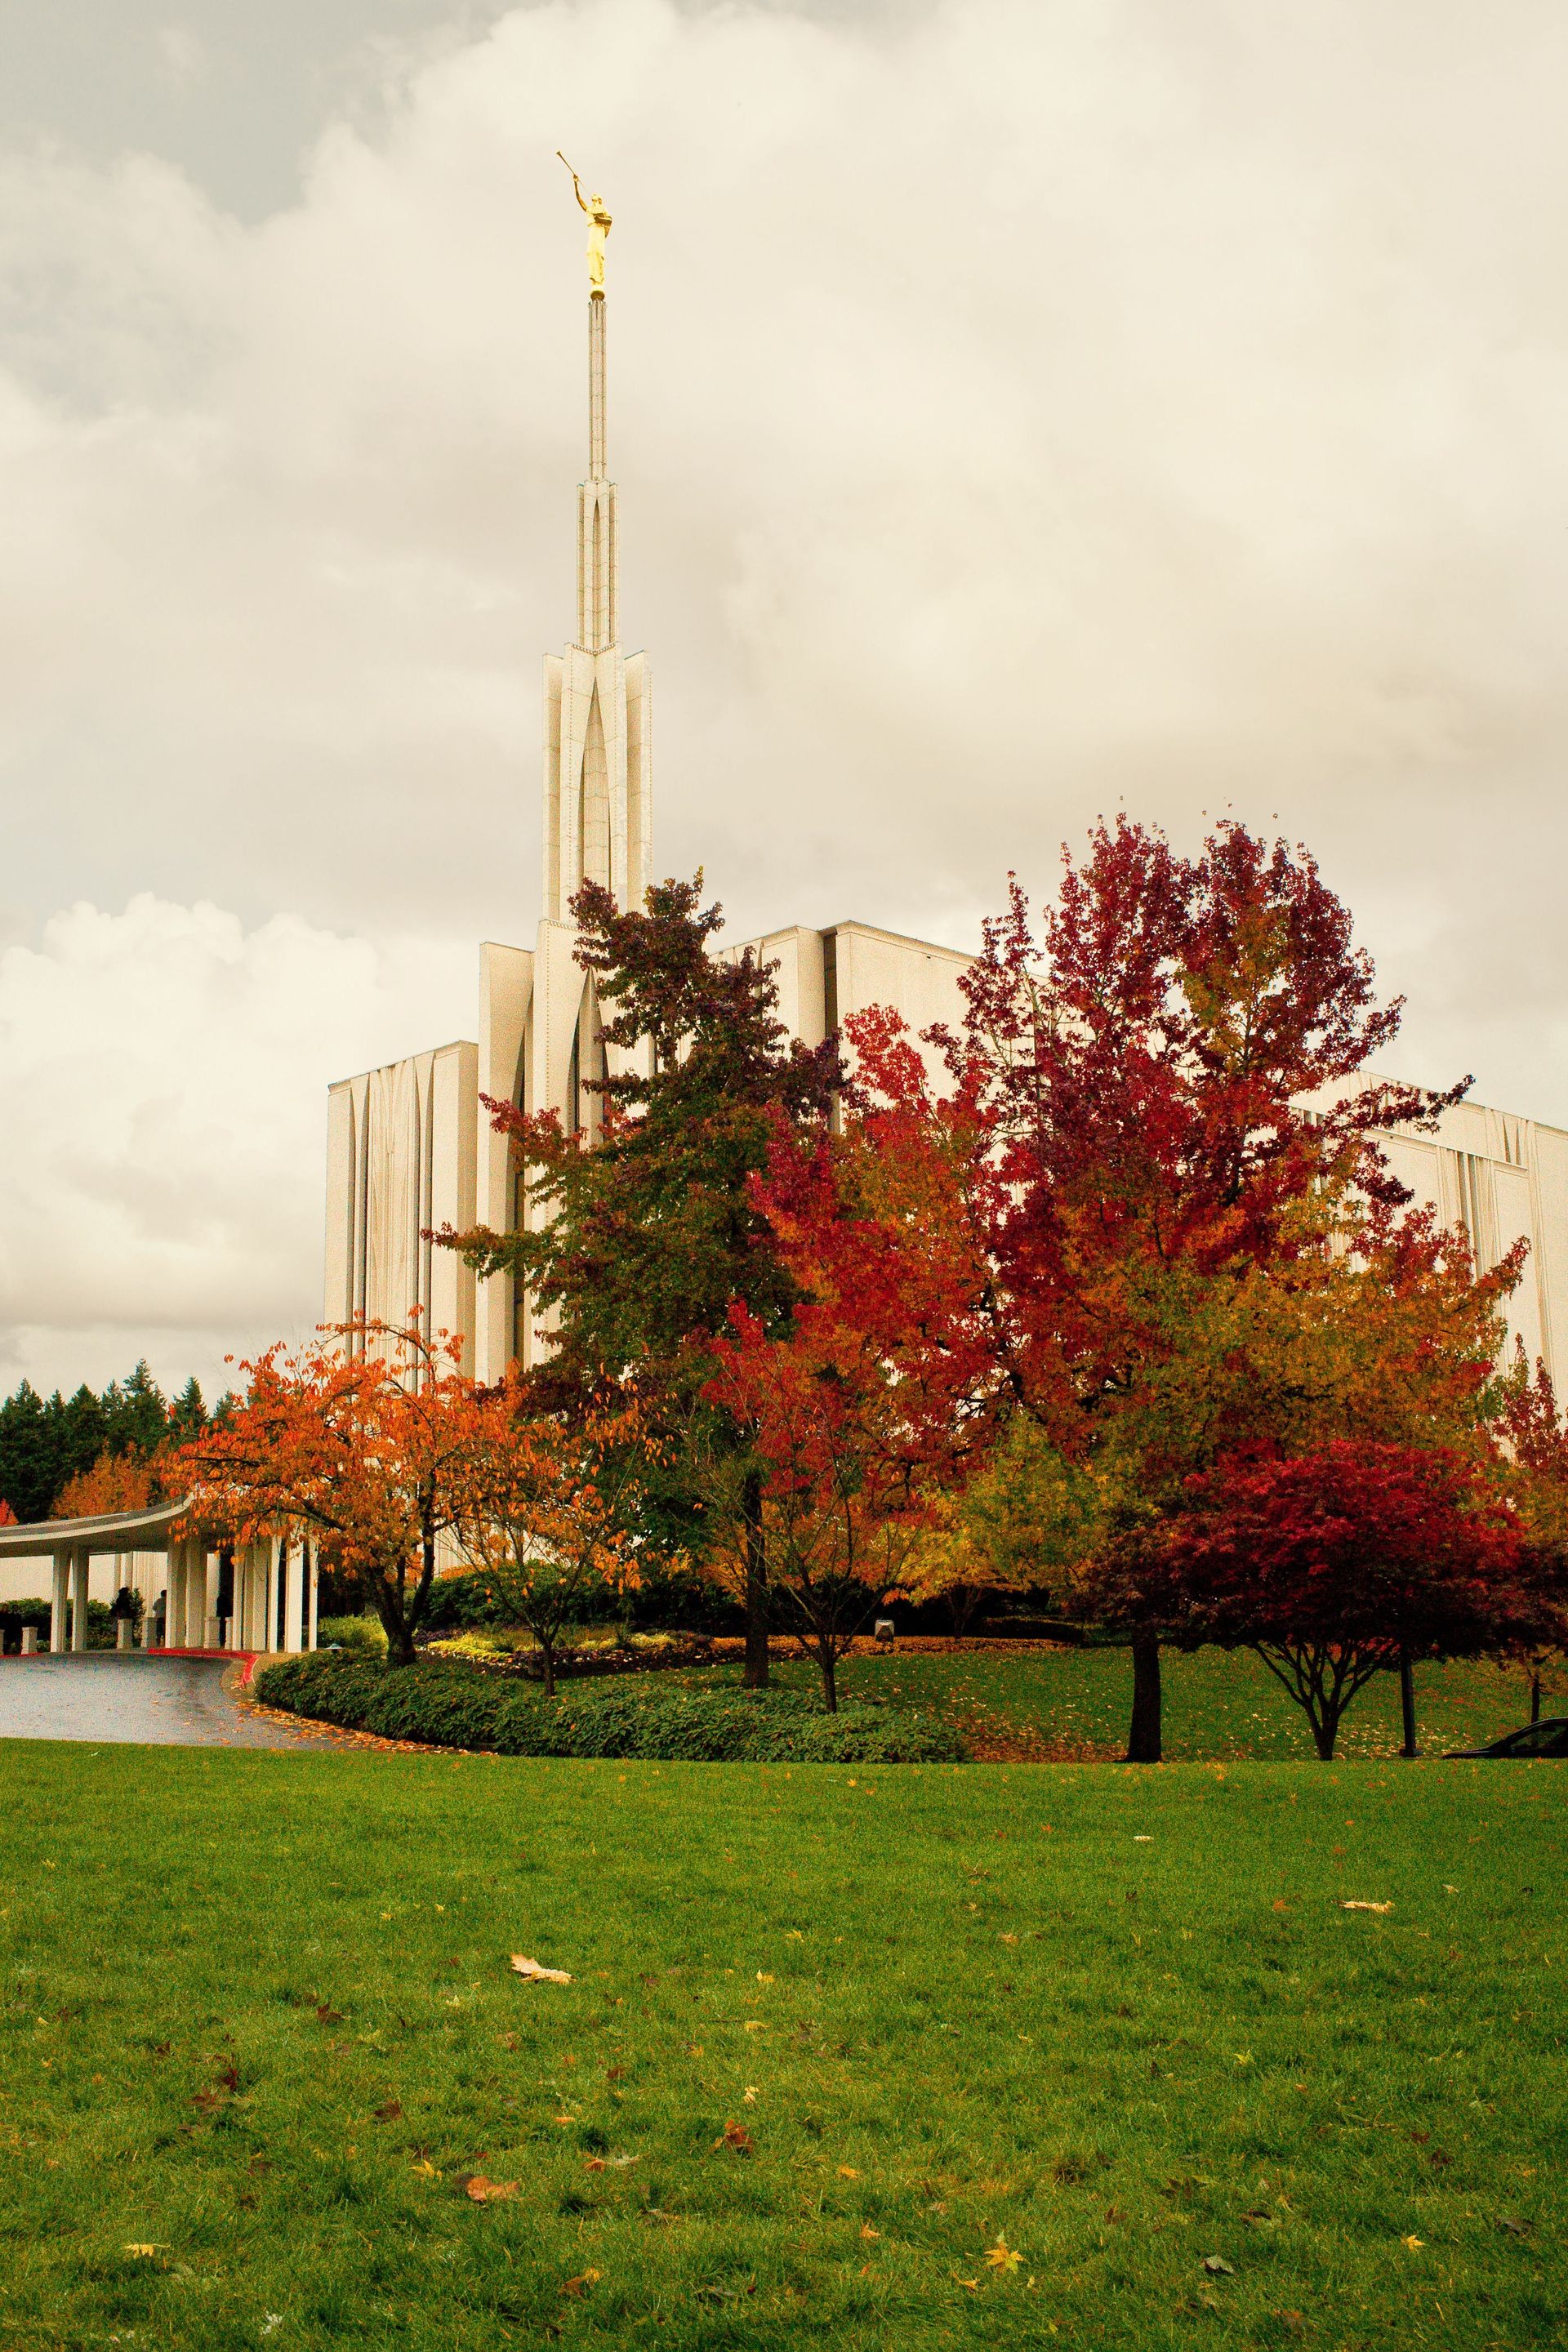 A side view of the Seattle Washington Temple in the fall, including the spire and scenery.